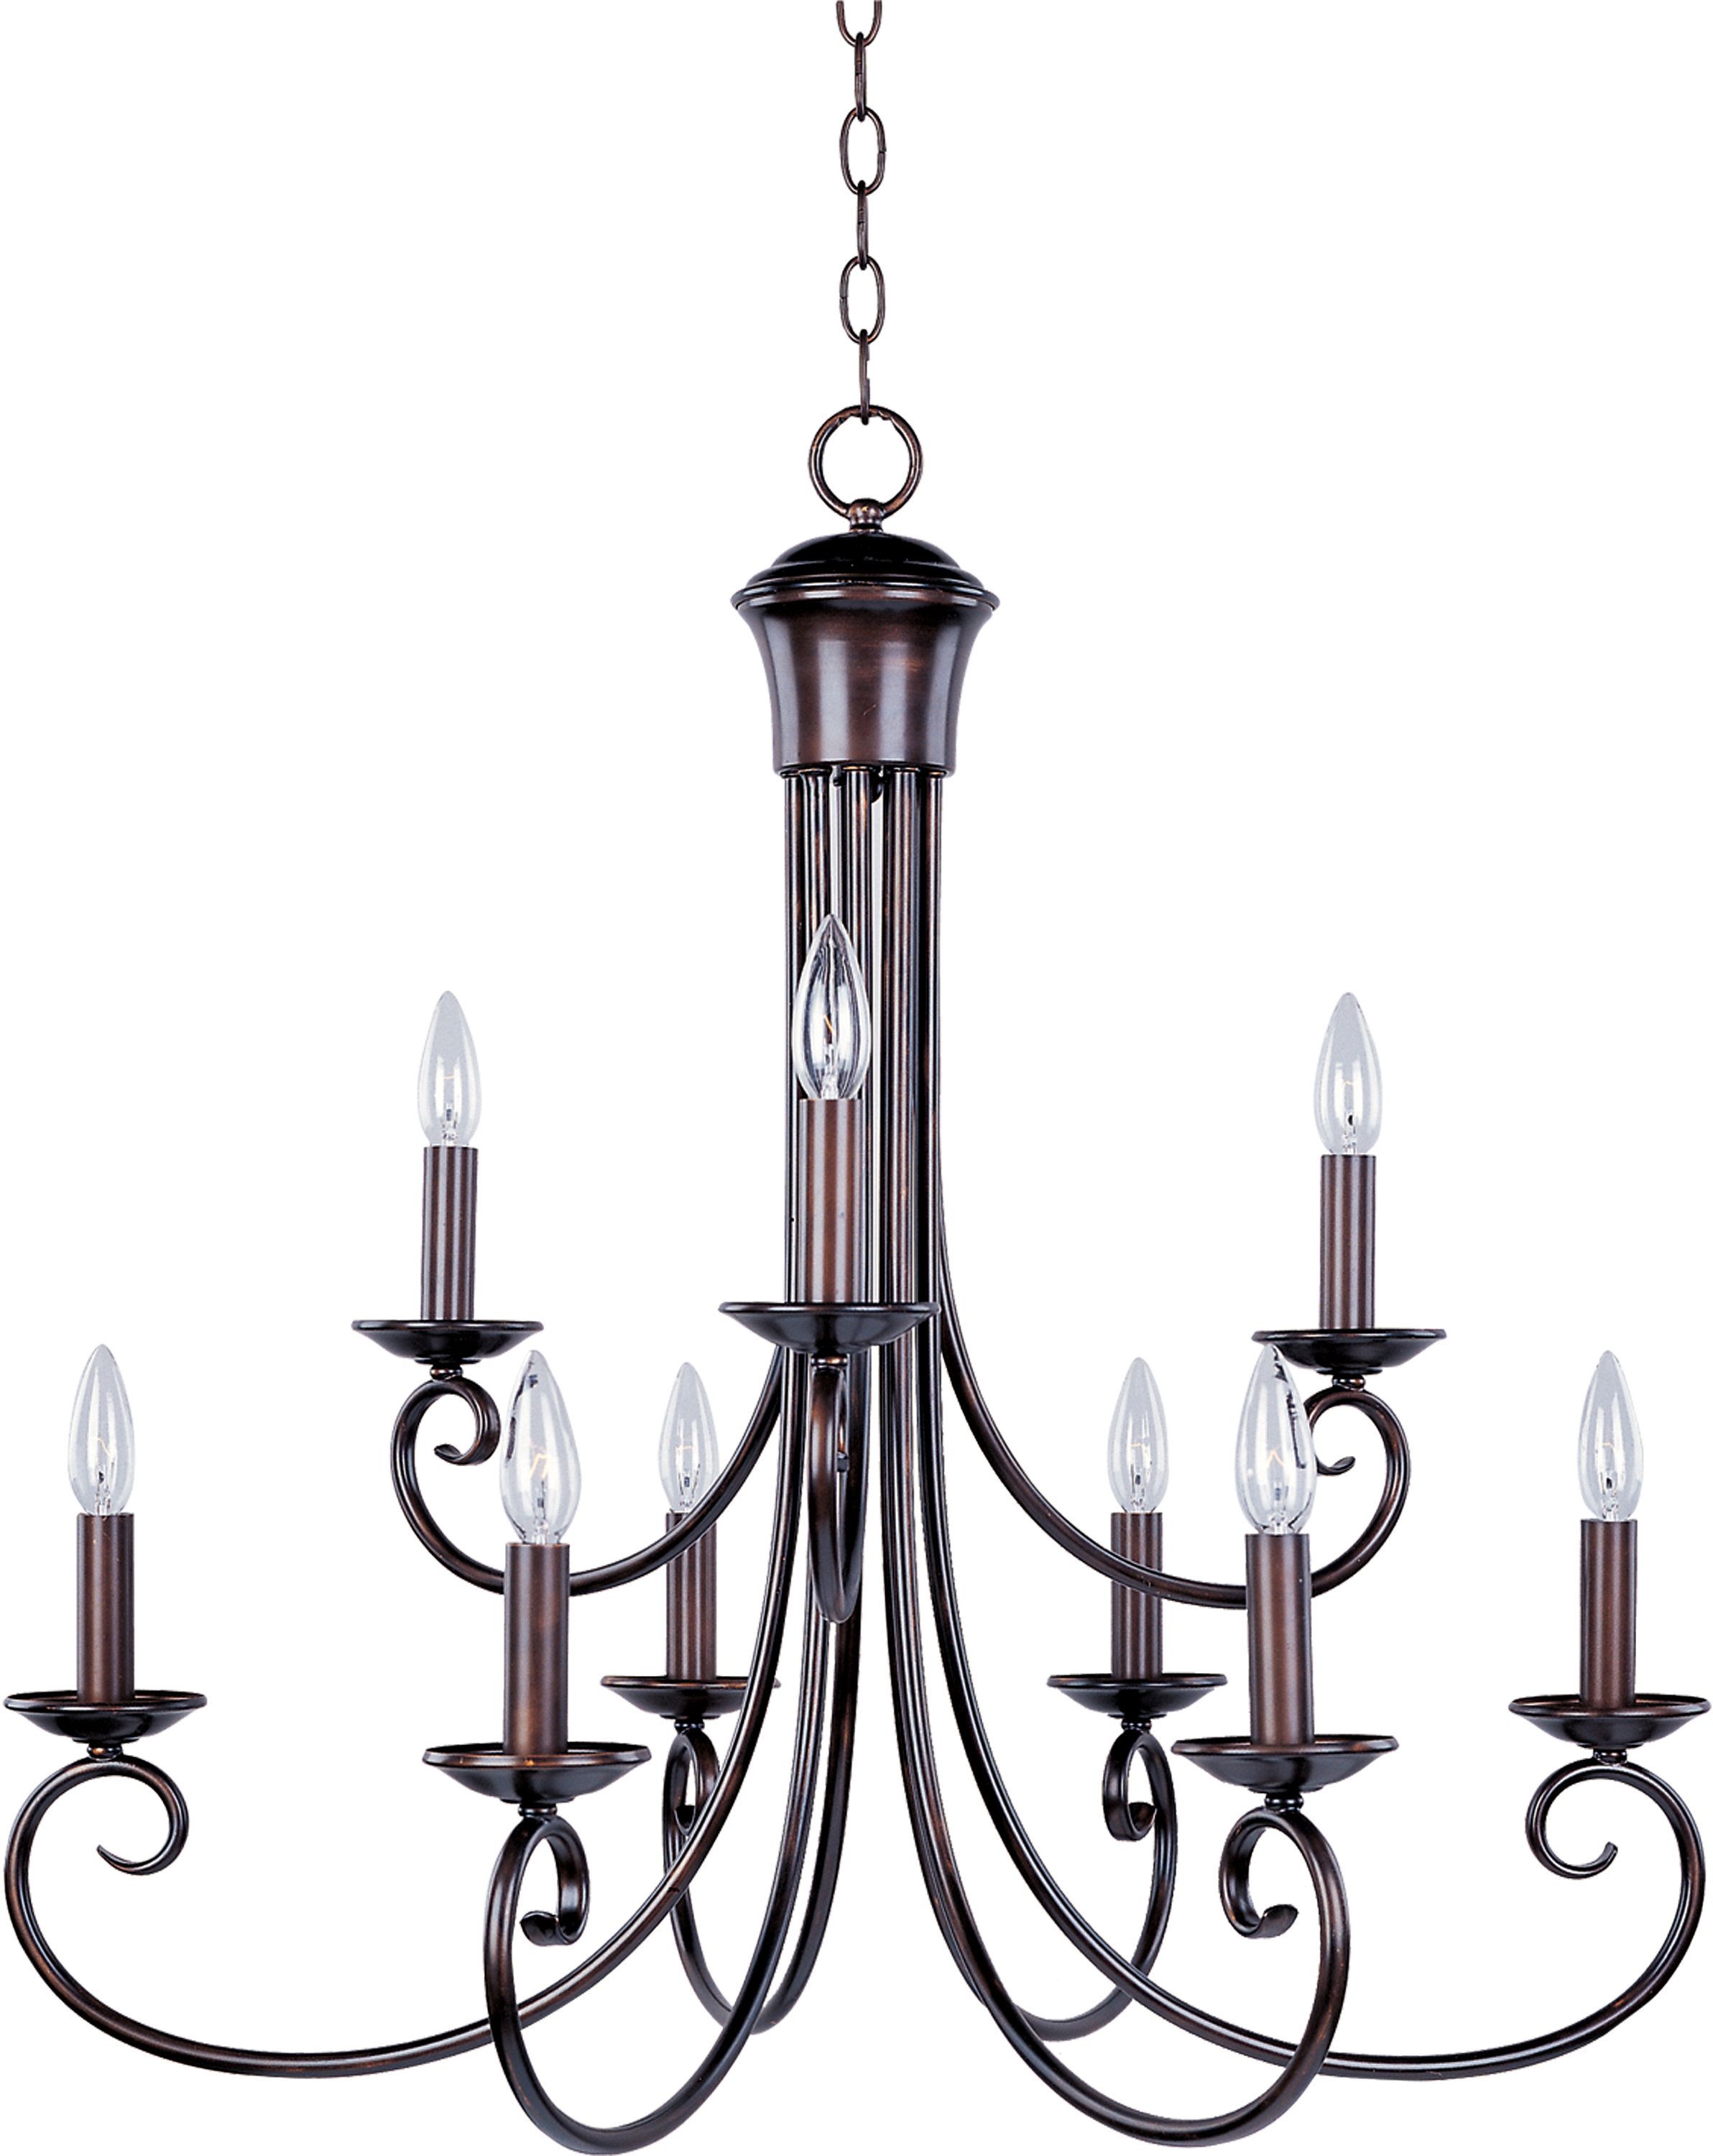 Latest Kenedy 9 Light Candle Style Chandelier With Regard To Gaines 9 Light Candle Style Chandeliers (View 4 of 25)